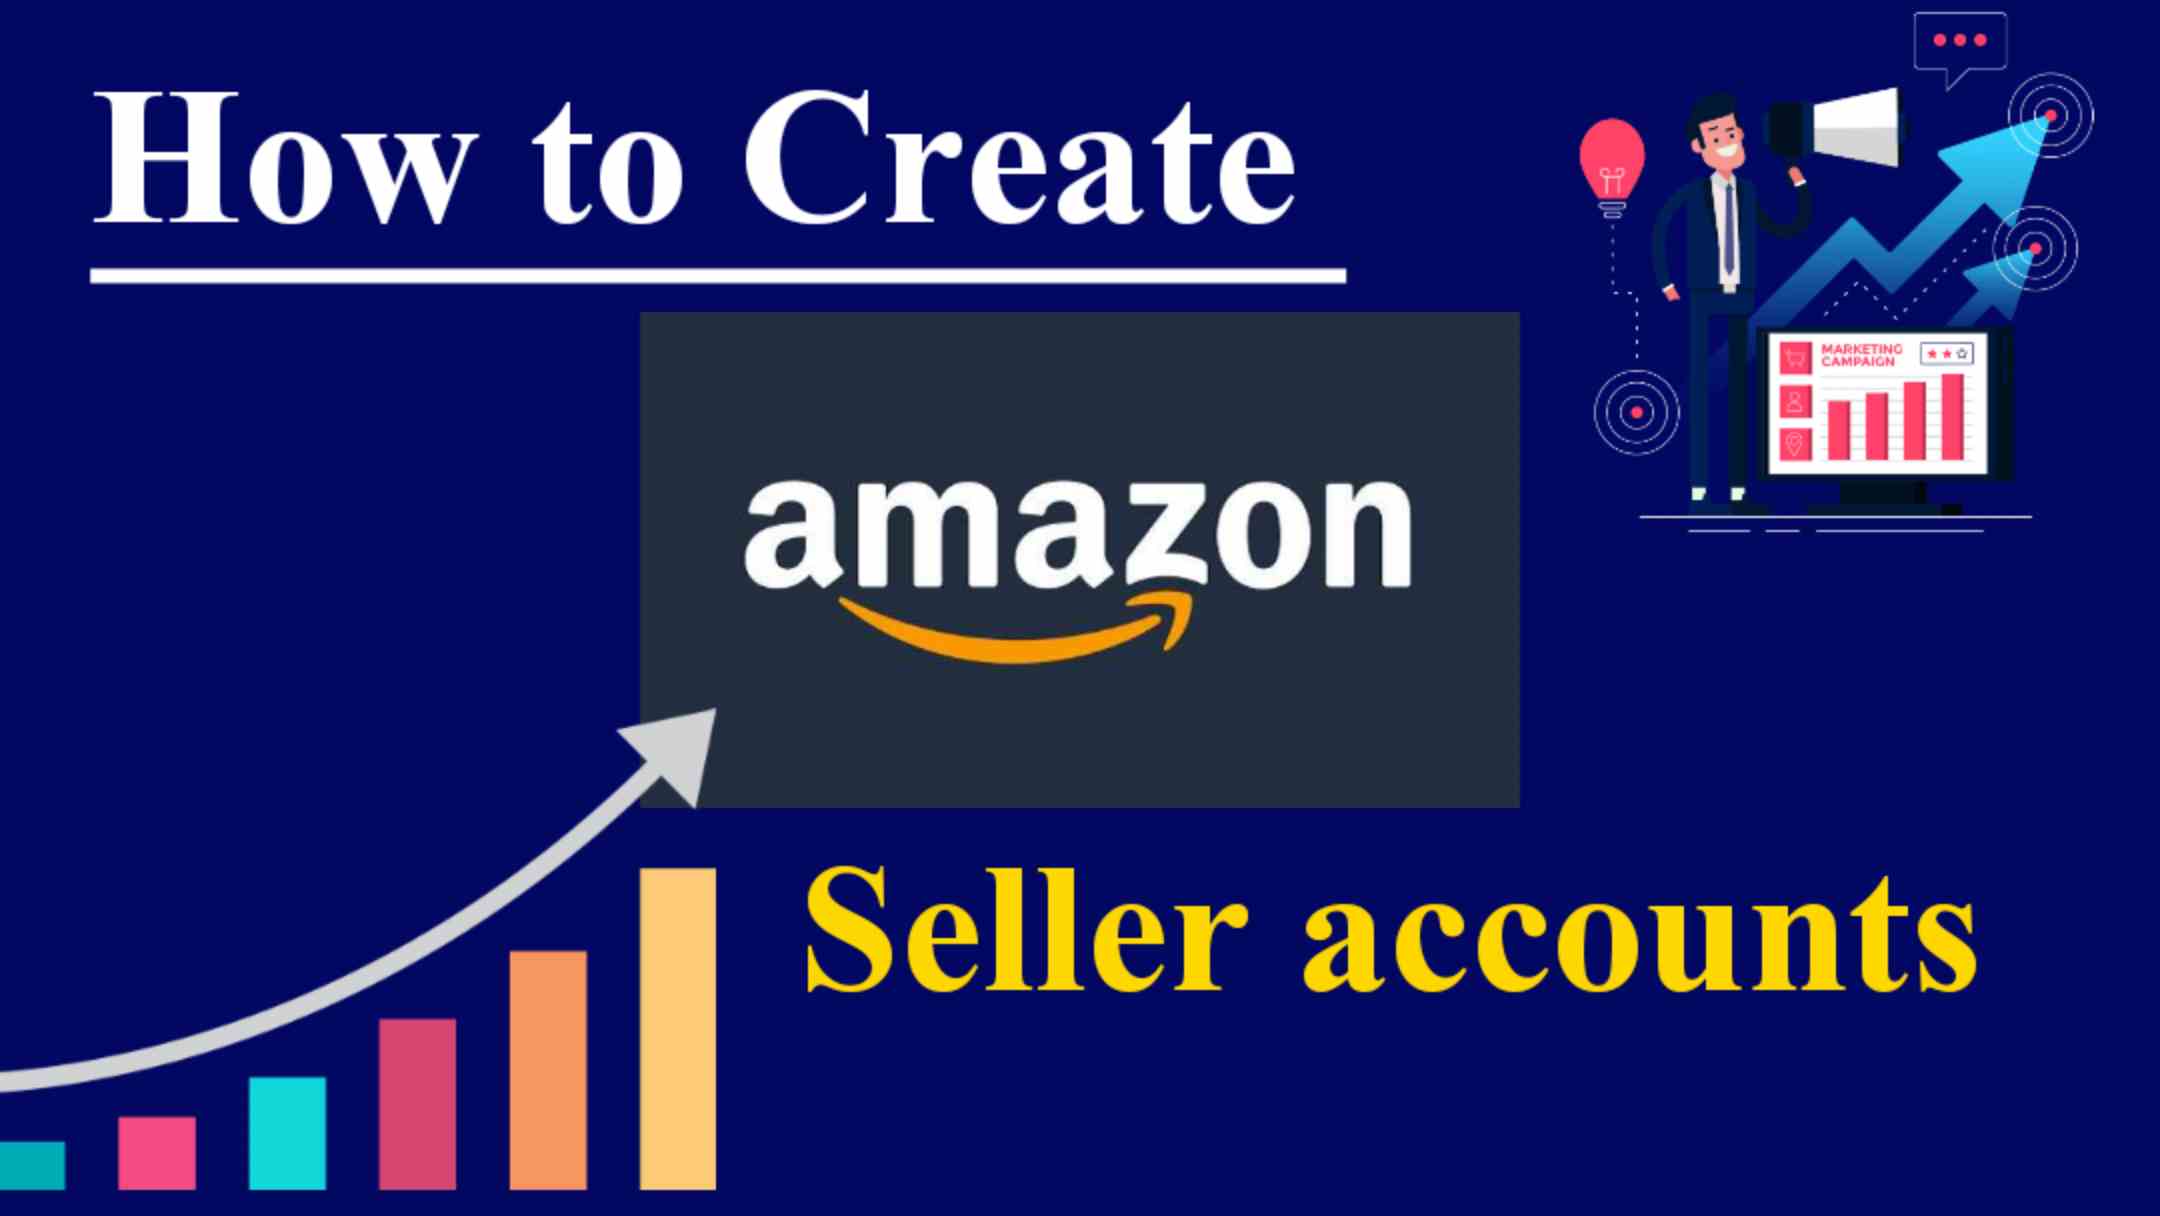 Create Amazon Seller Accounts in Just 5 Minutes/ how to make amazon seller/